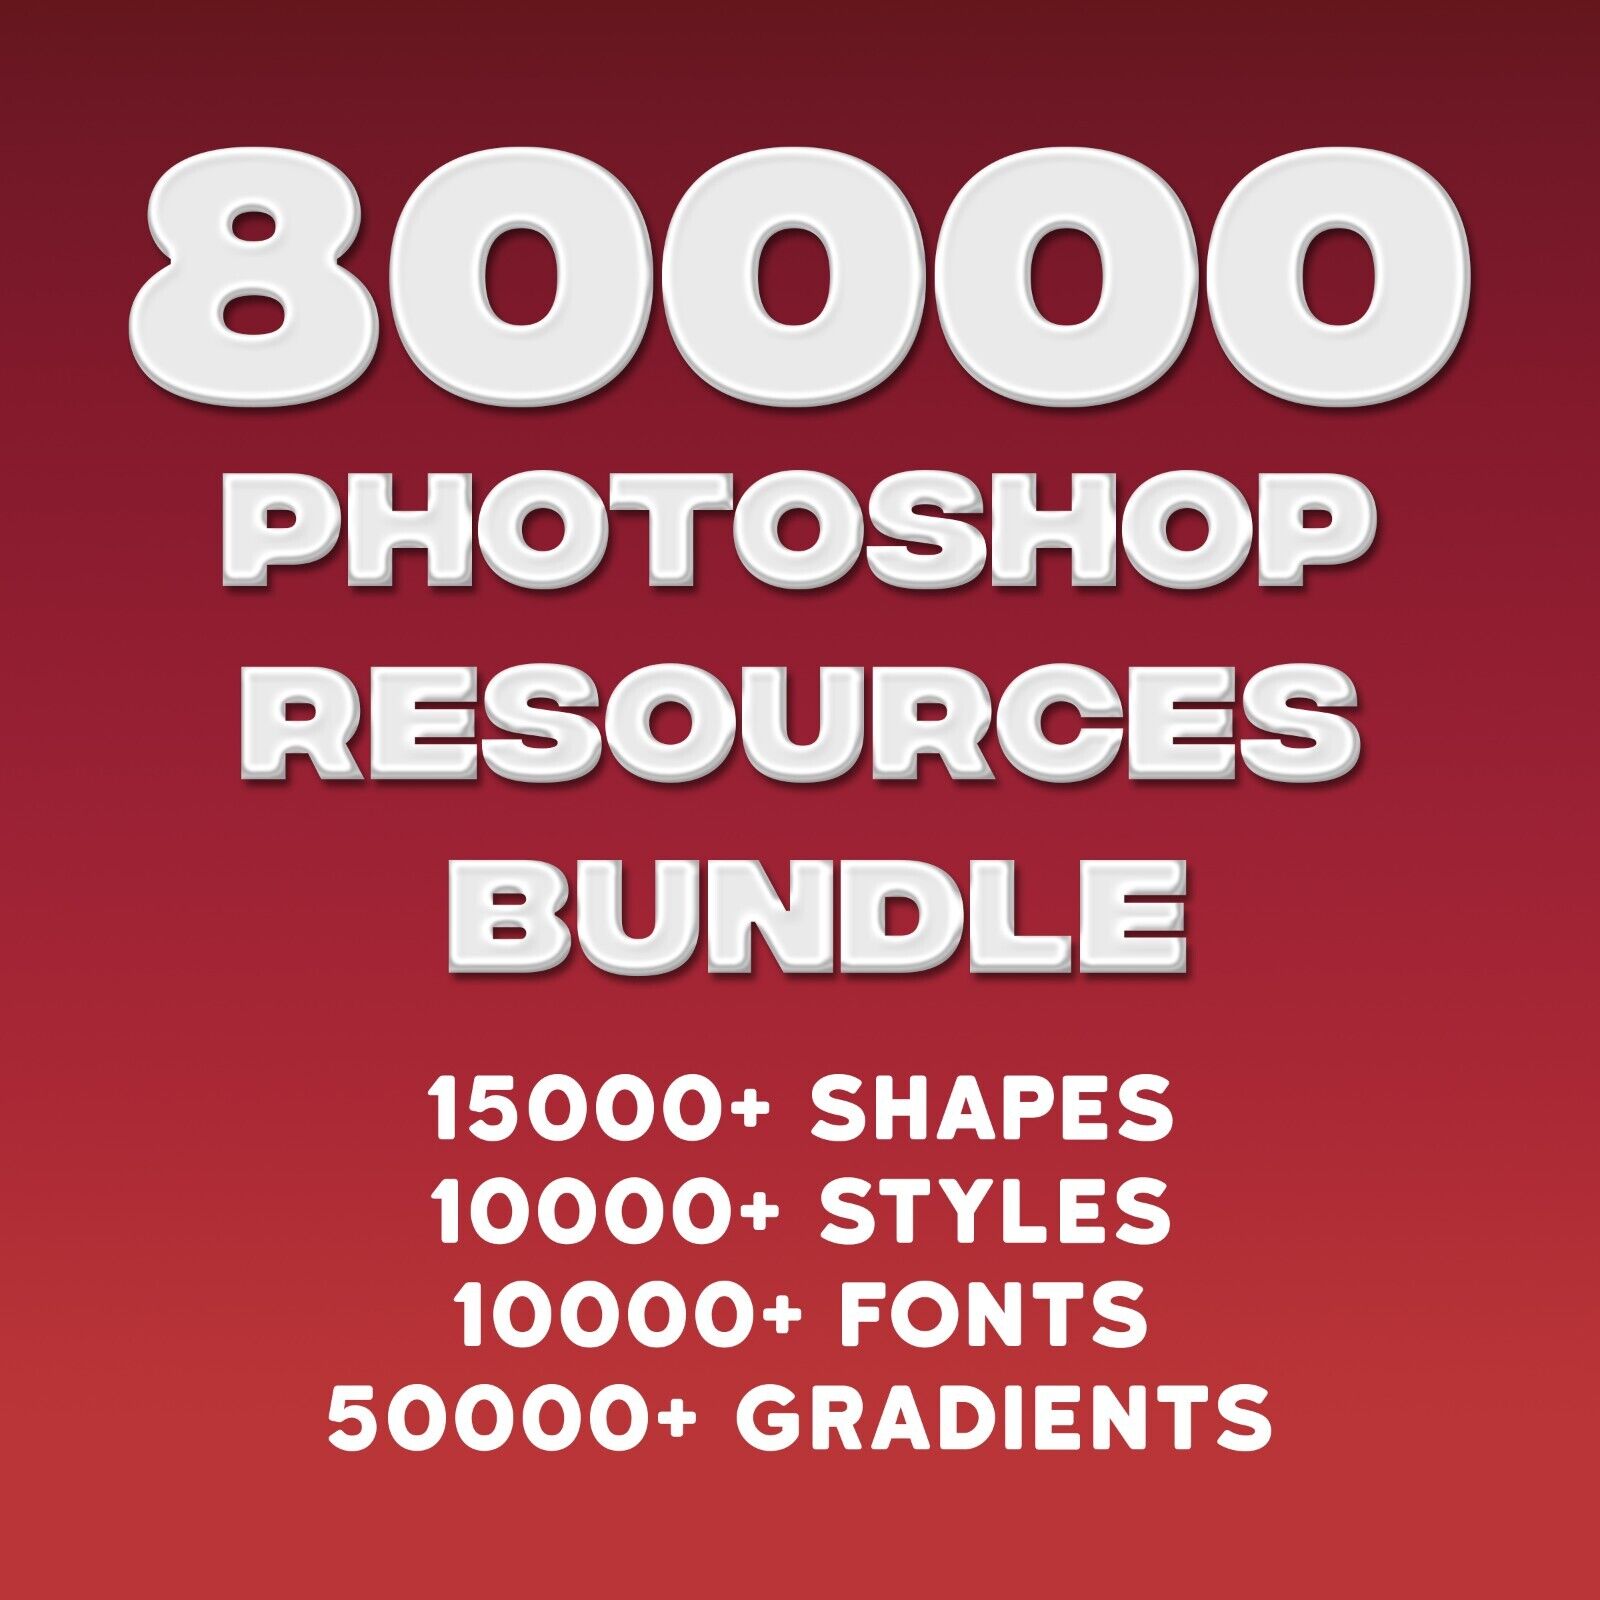 80000 Photoshop Resources Collection with past Delivery